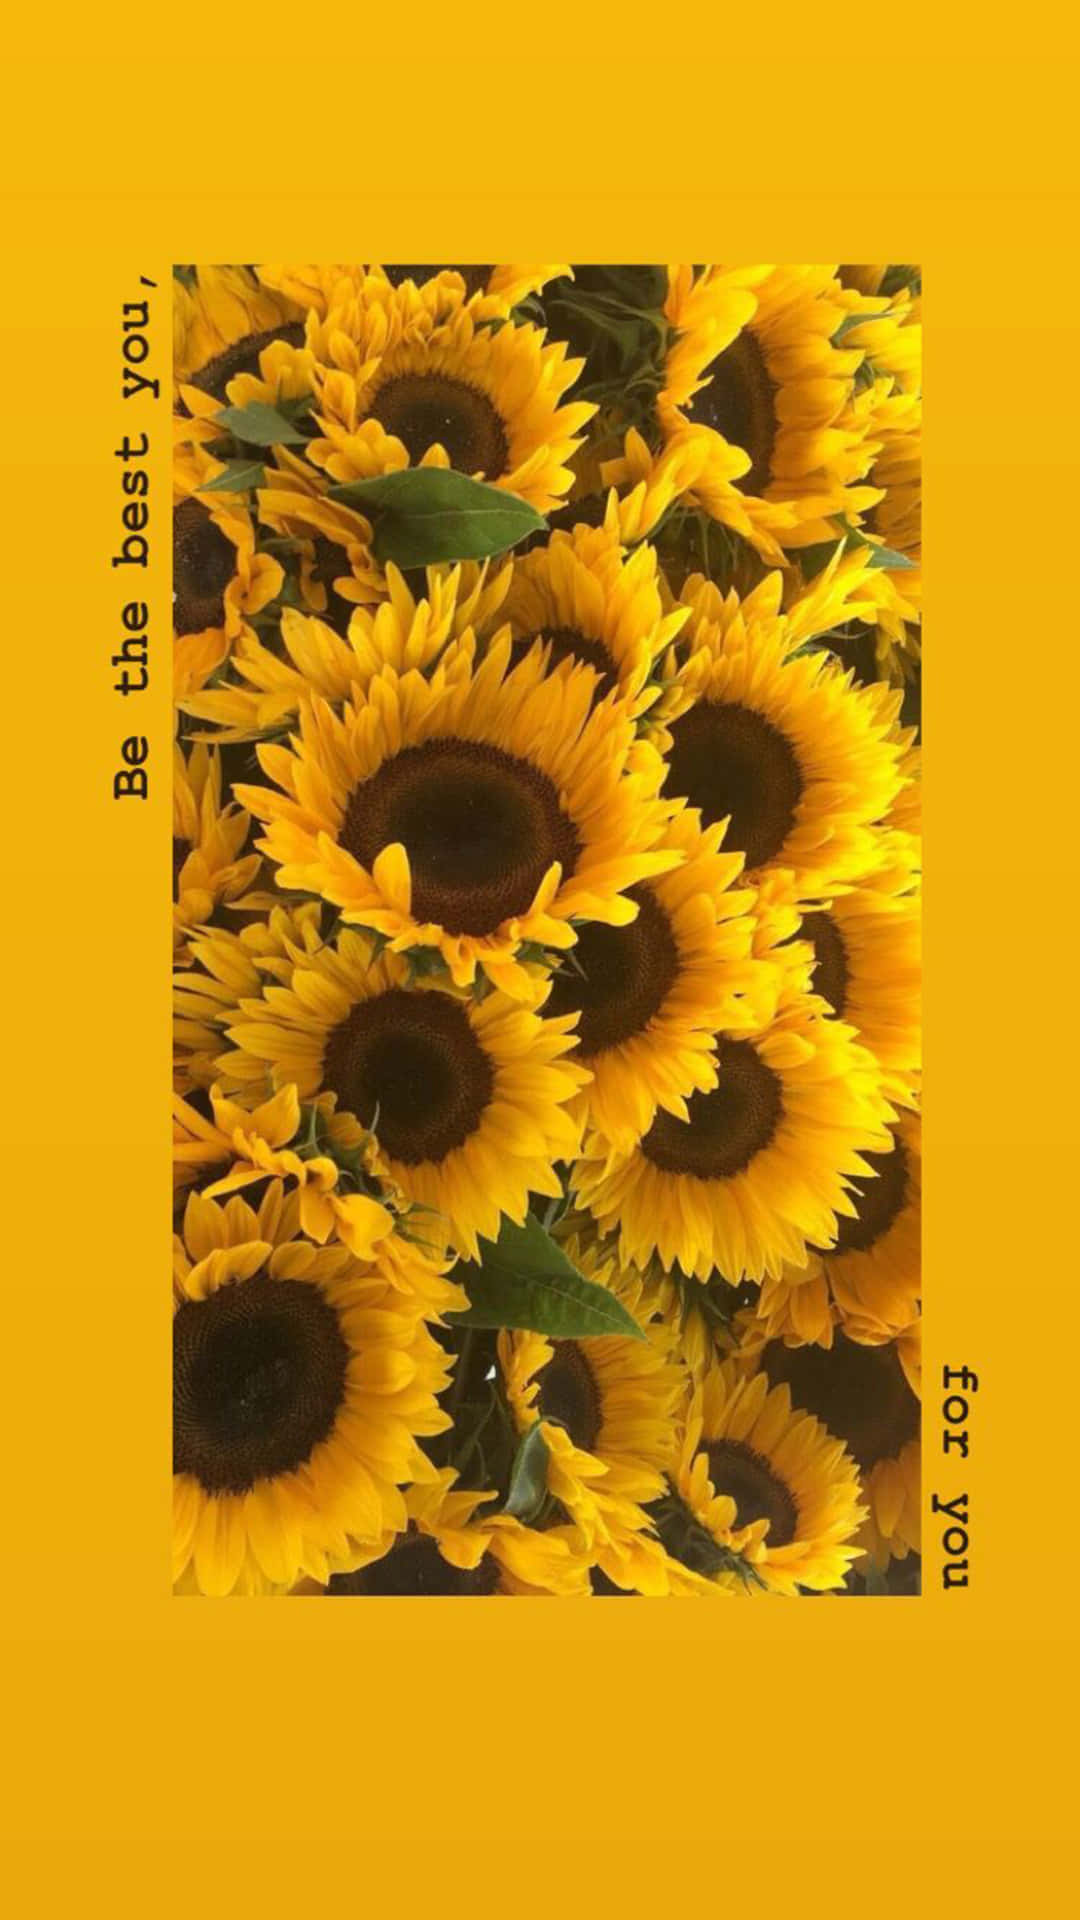 Relax in Nature's Beauty With This Sunflower Aesthetic iPhone Wallpaper Wallpaper